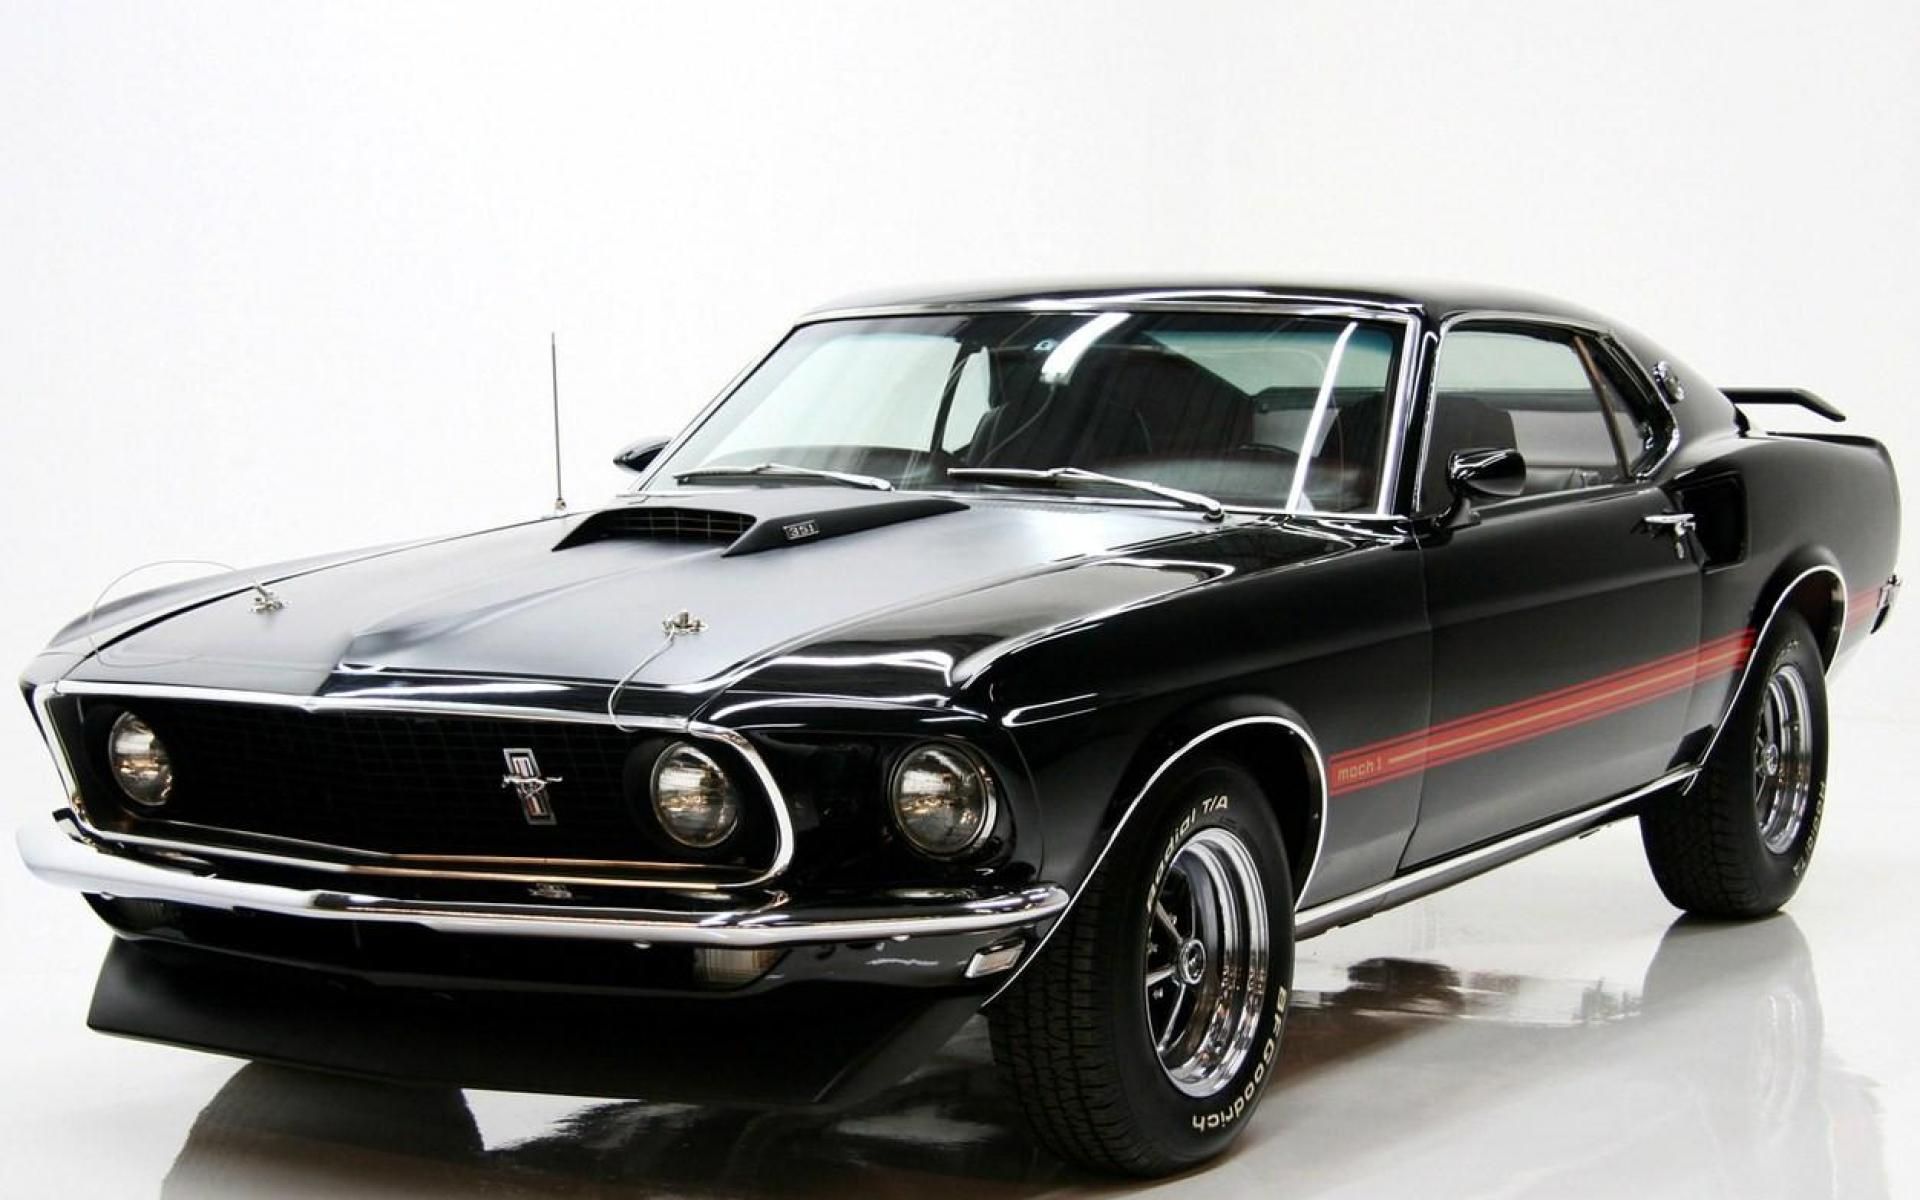 1969 ford mustang - High Quality and Resolution